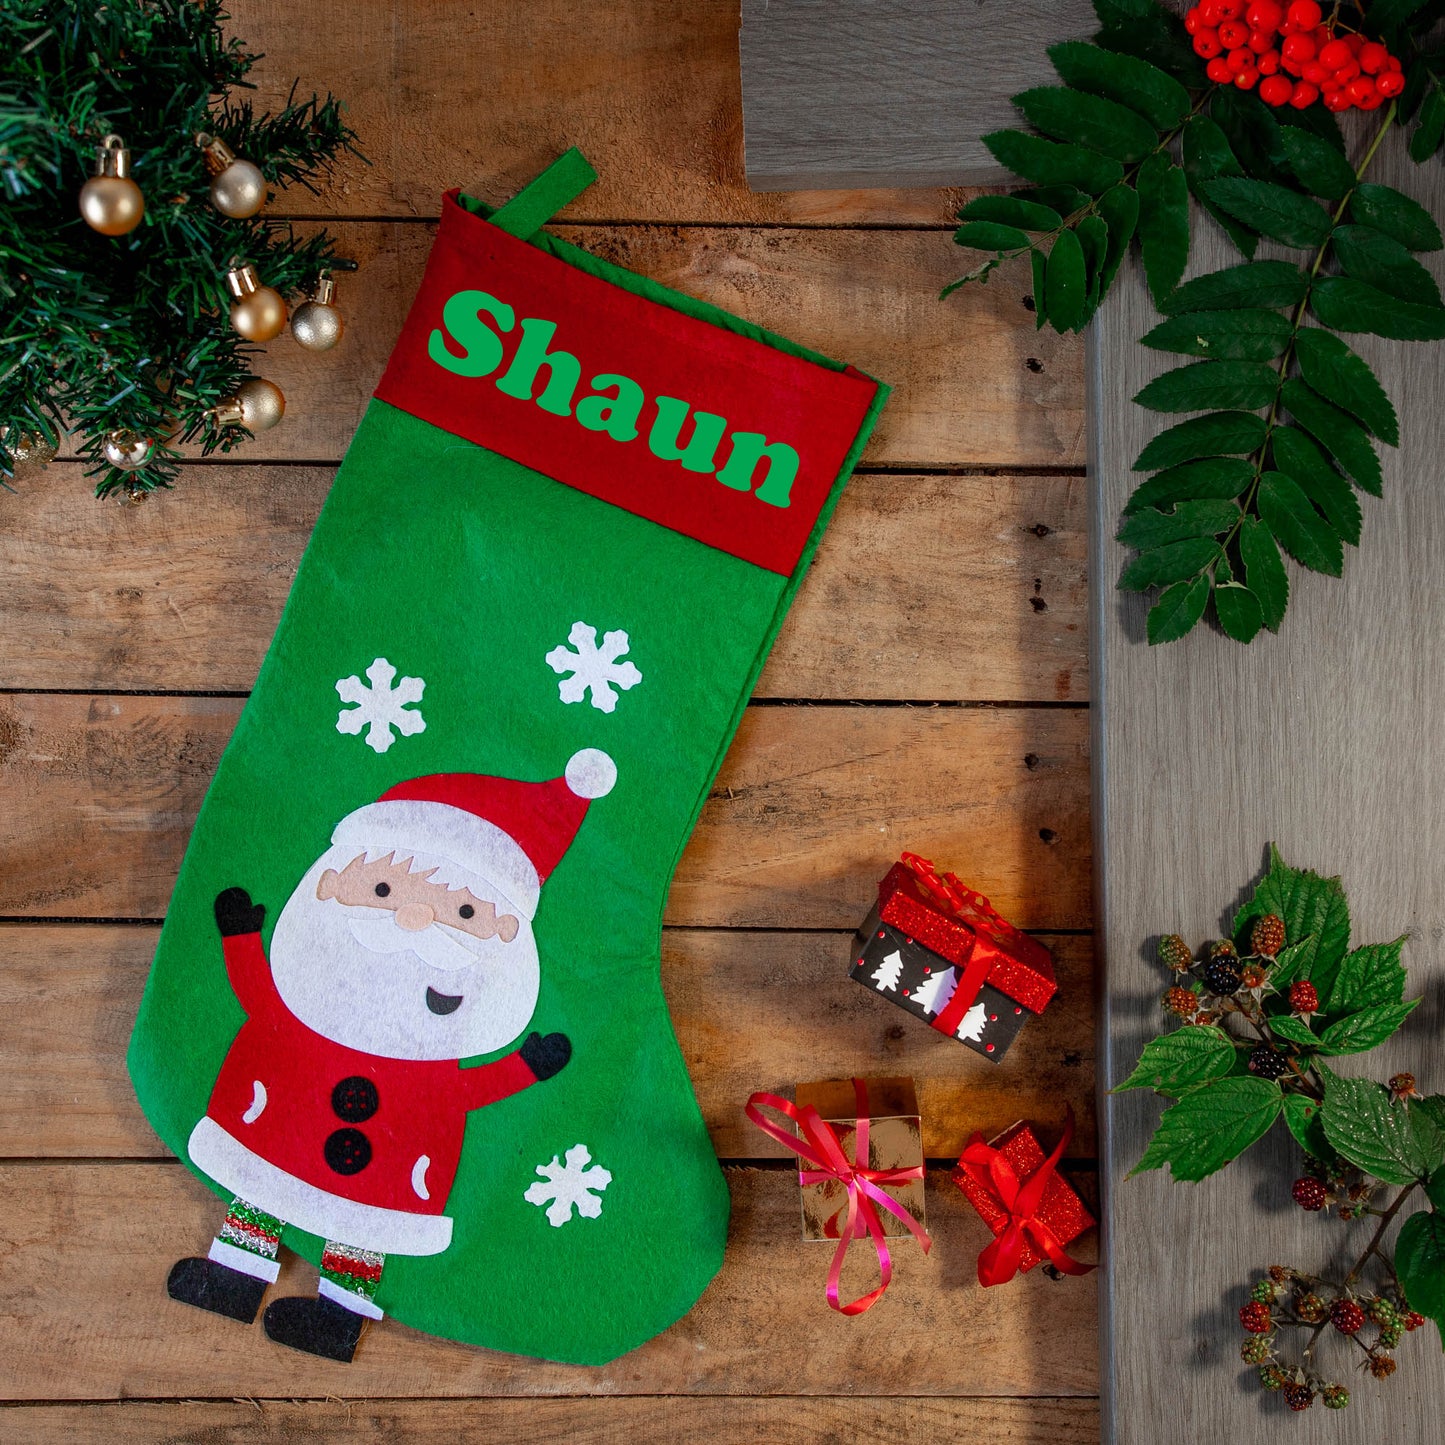 Vinyled Christmas Stocking and Present Sack Personalised with Name Kids Christmas Eve Set  - Always Looking Good -   